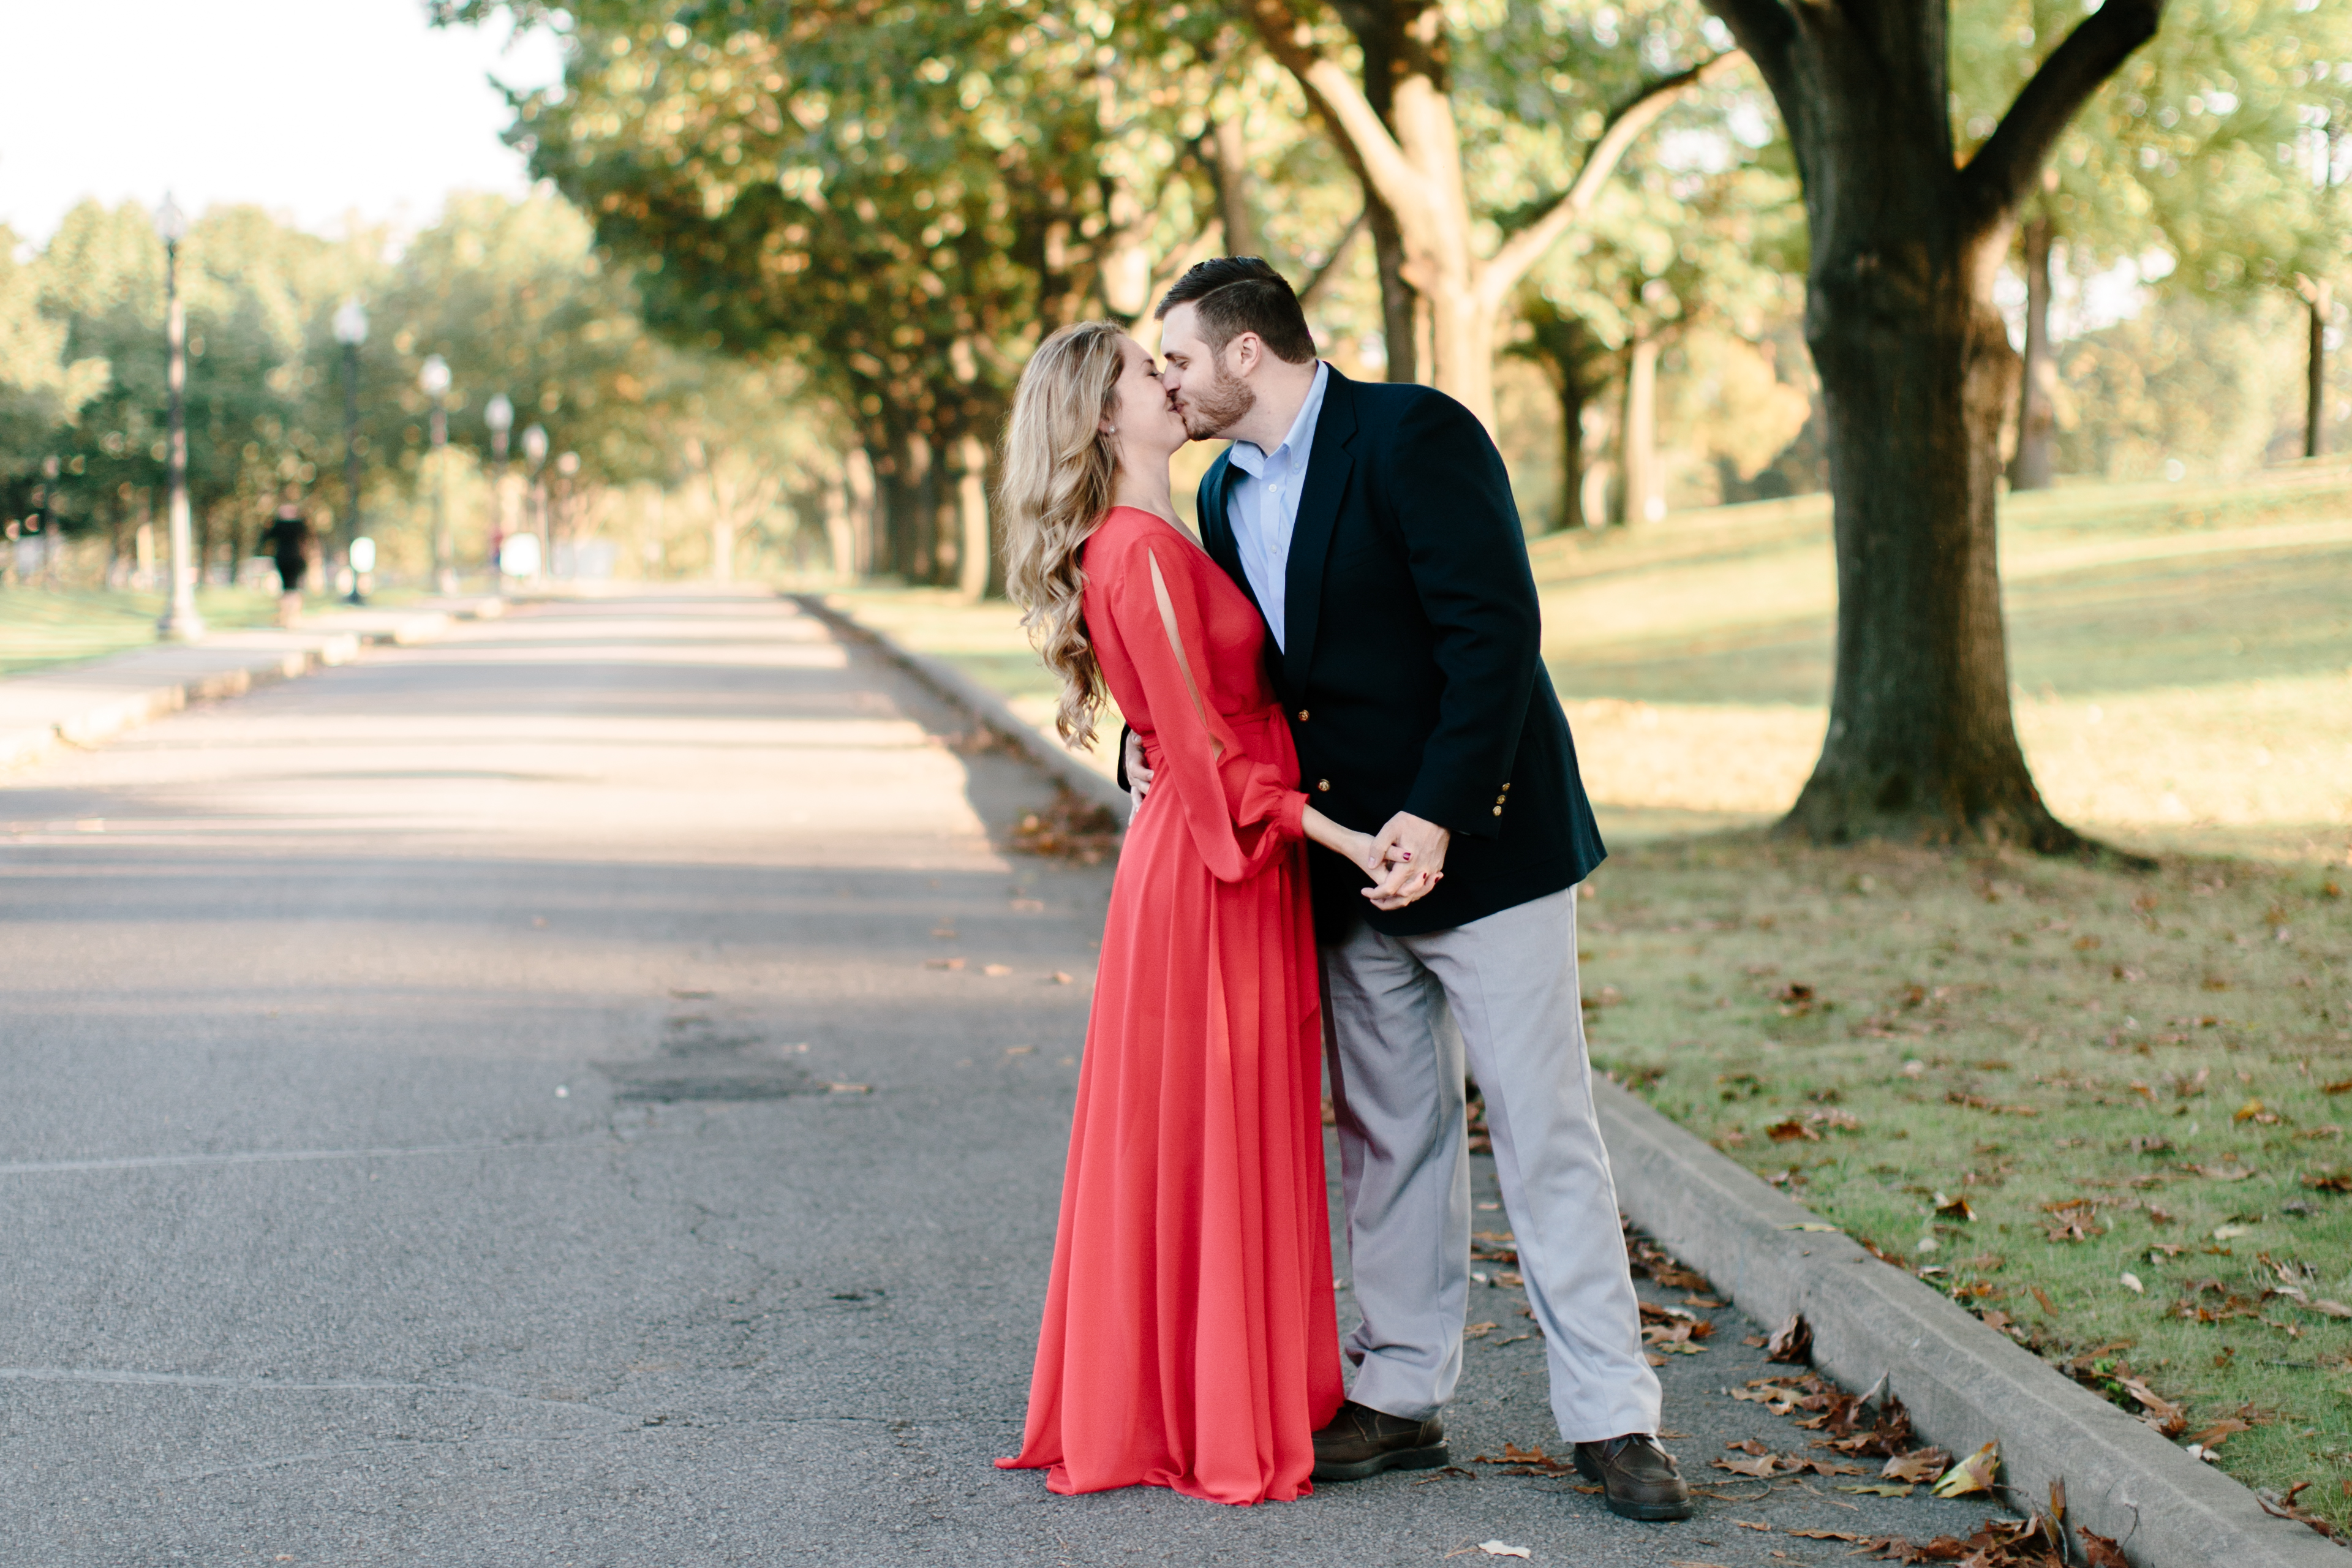 Kiss under a tree during romantic cleveland engagement session